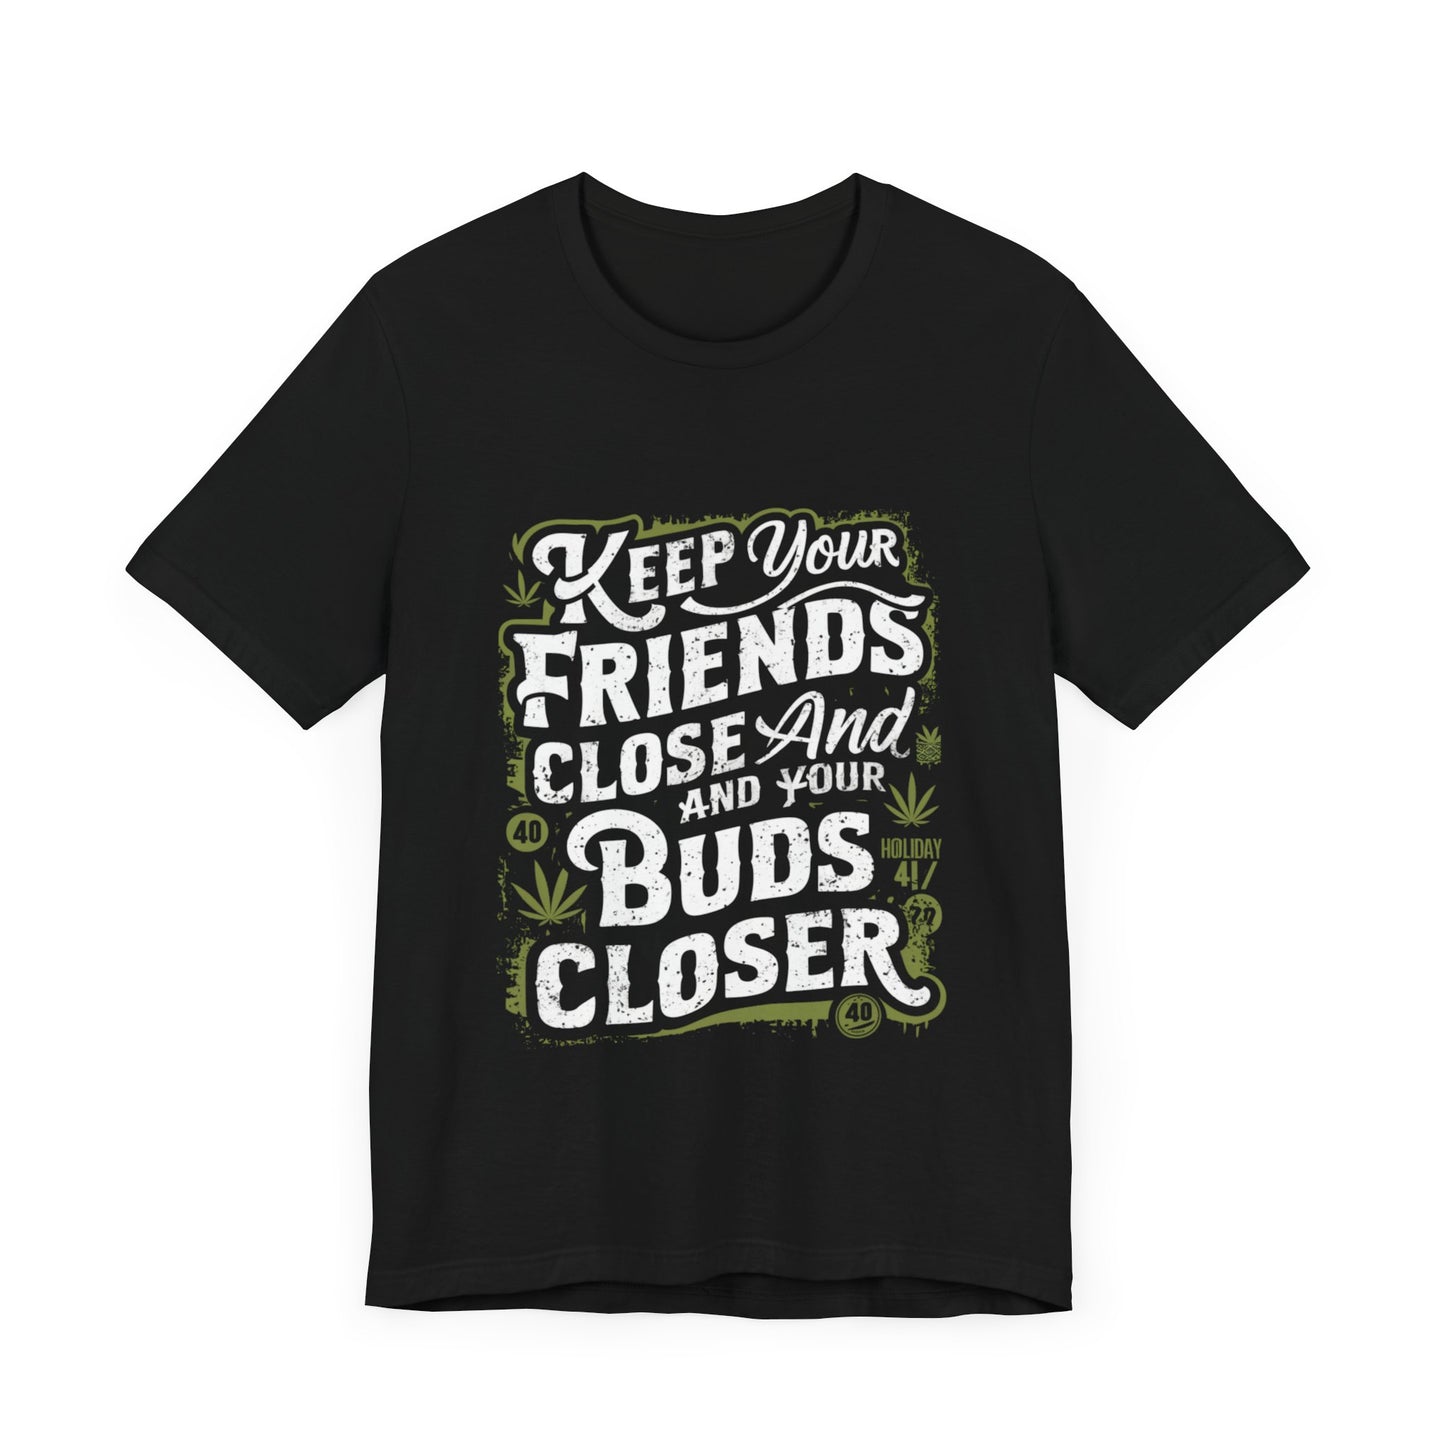 Keep Your Friends Close And Your Buds Closer Jersey Short Sleeve Tee For Men